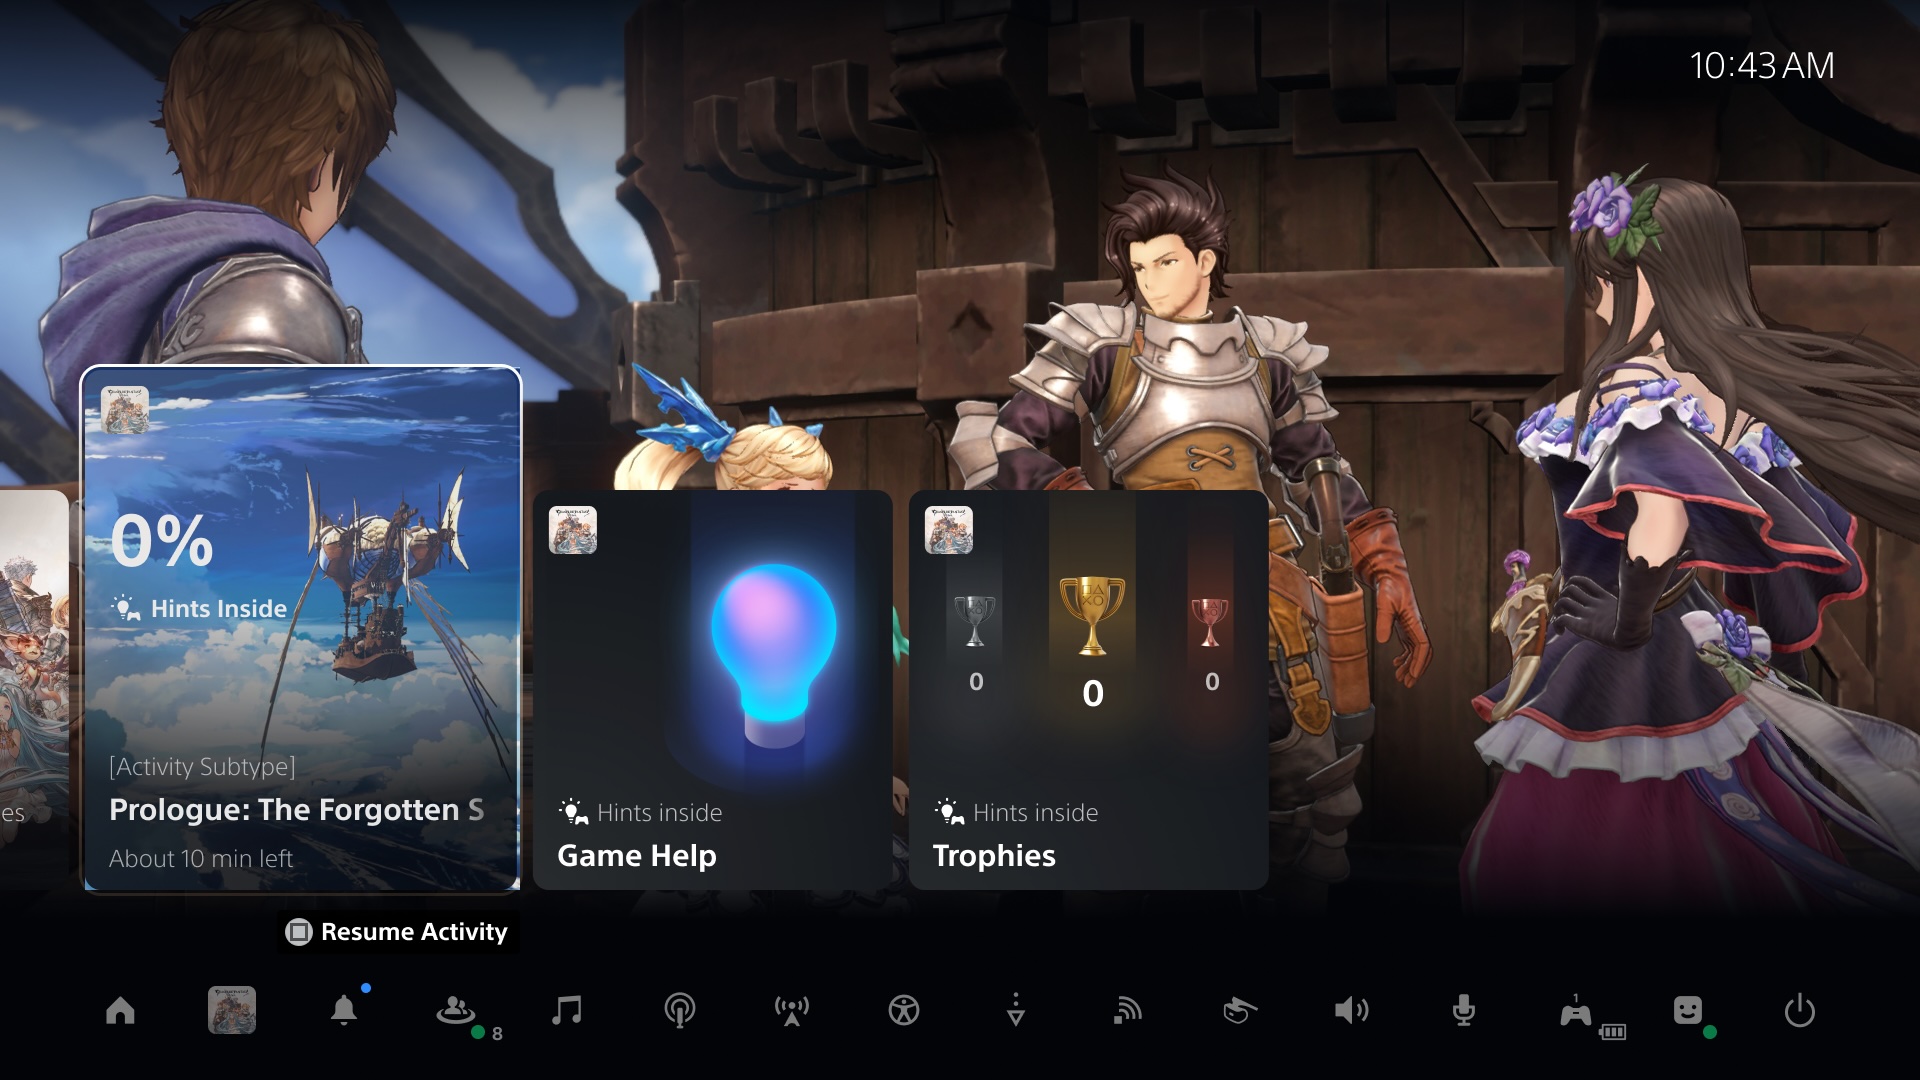  "PS5 UI screenshot showing Community Game Help for Granblue Fantasy: Relink"